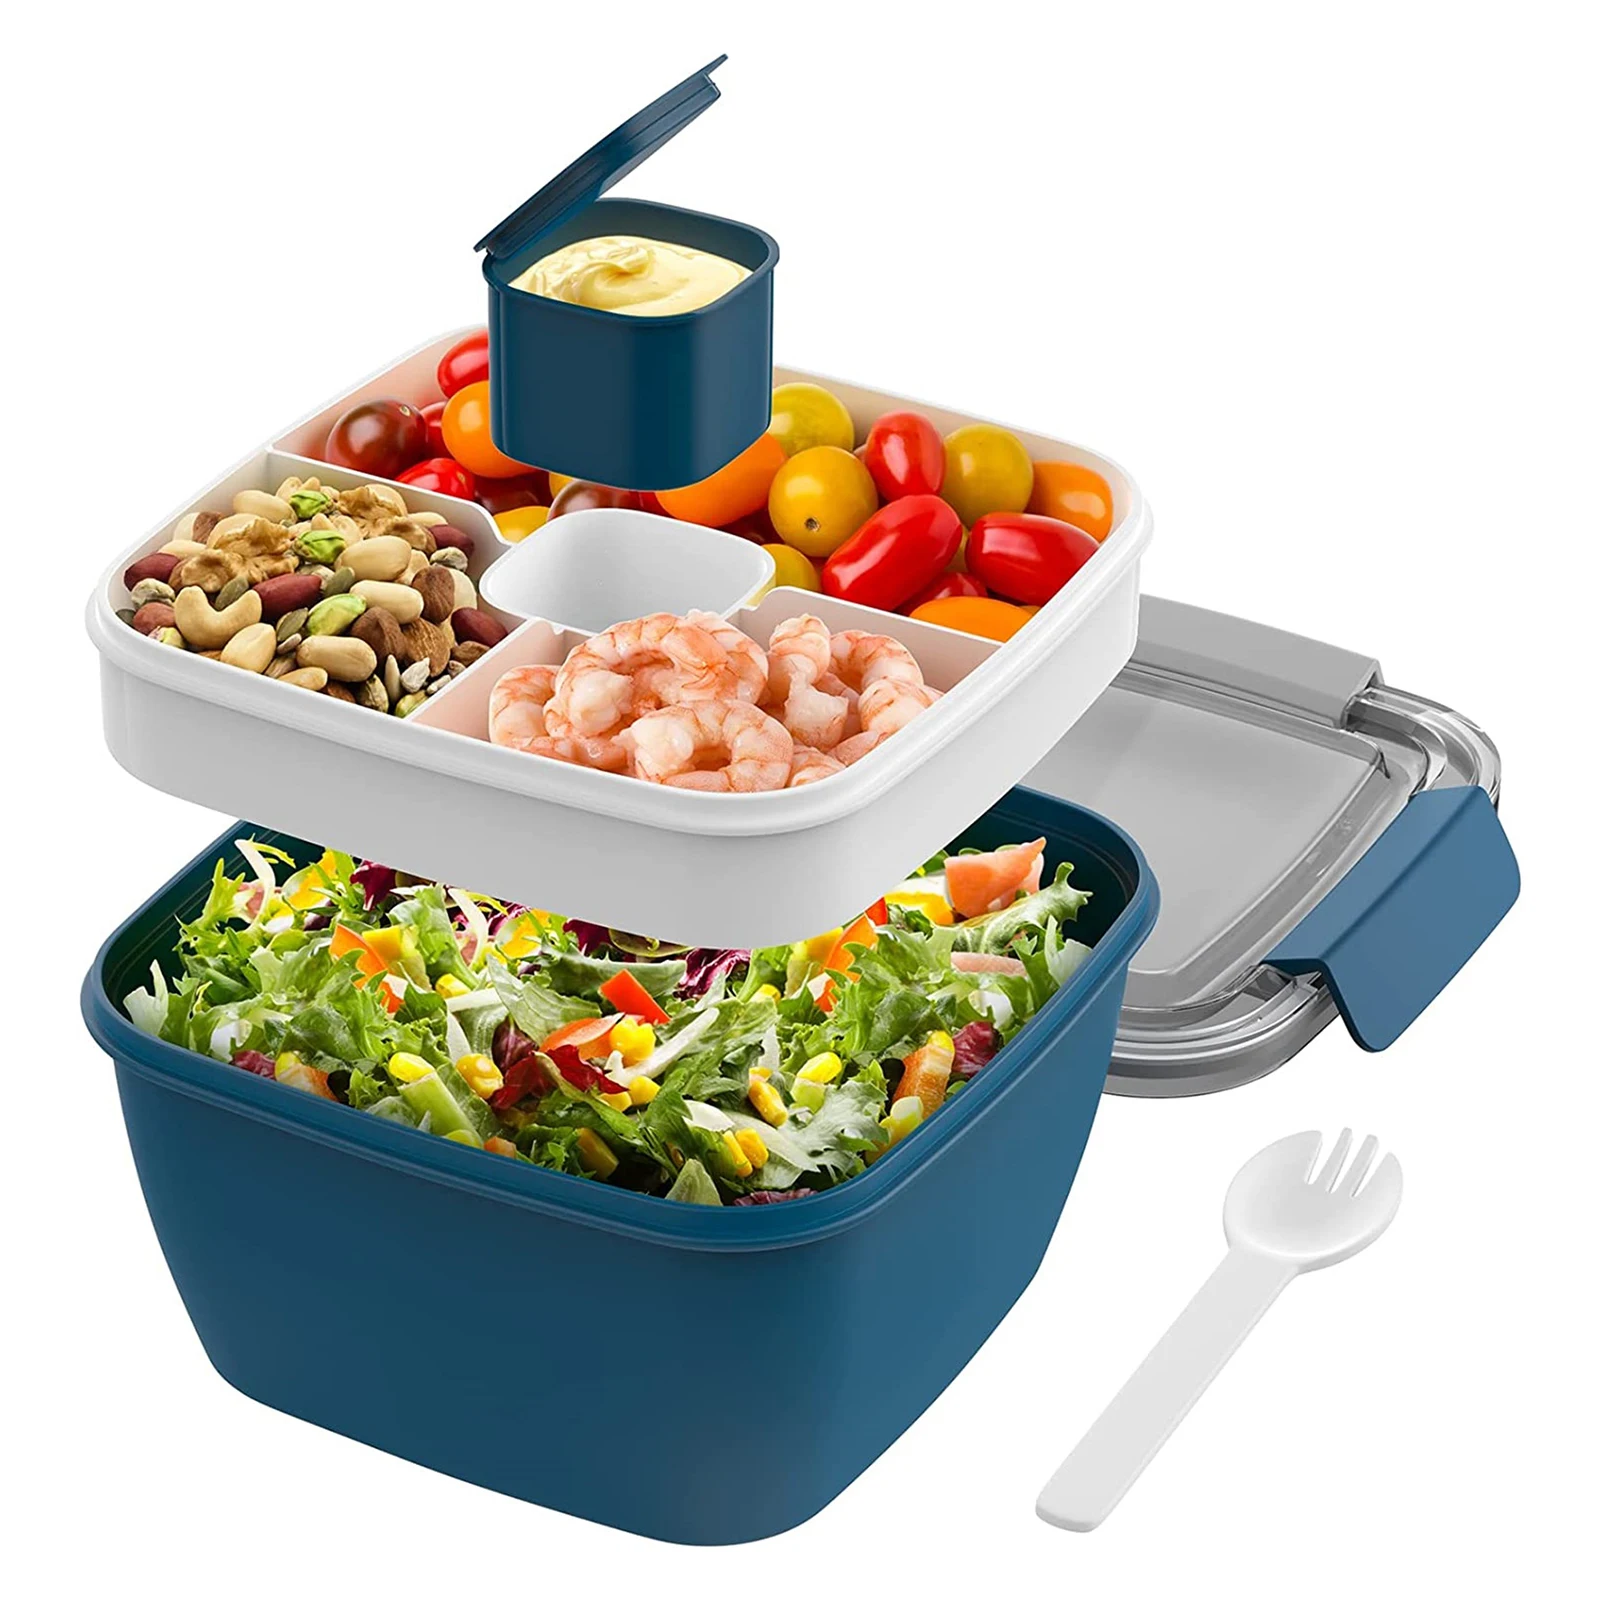 

Salad Container For Lunch Leak-Proof Salad Container Box Lunch Box With Large 52-oz Salad Bowl 3-Compartment Bento-Style Tray